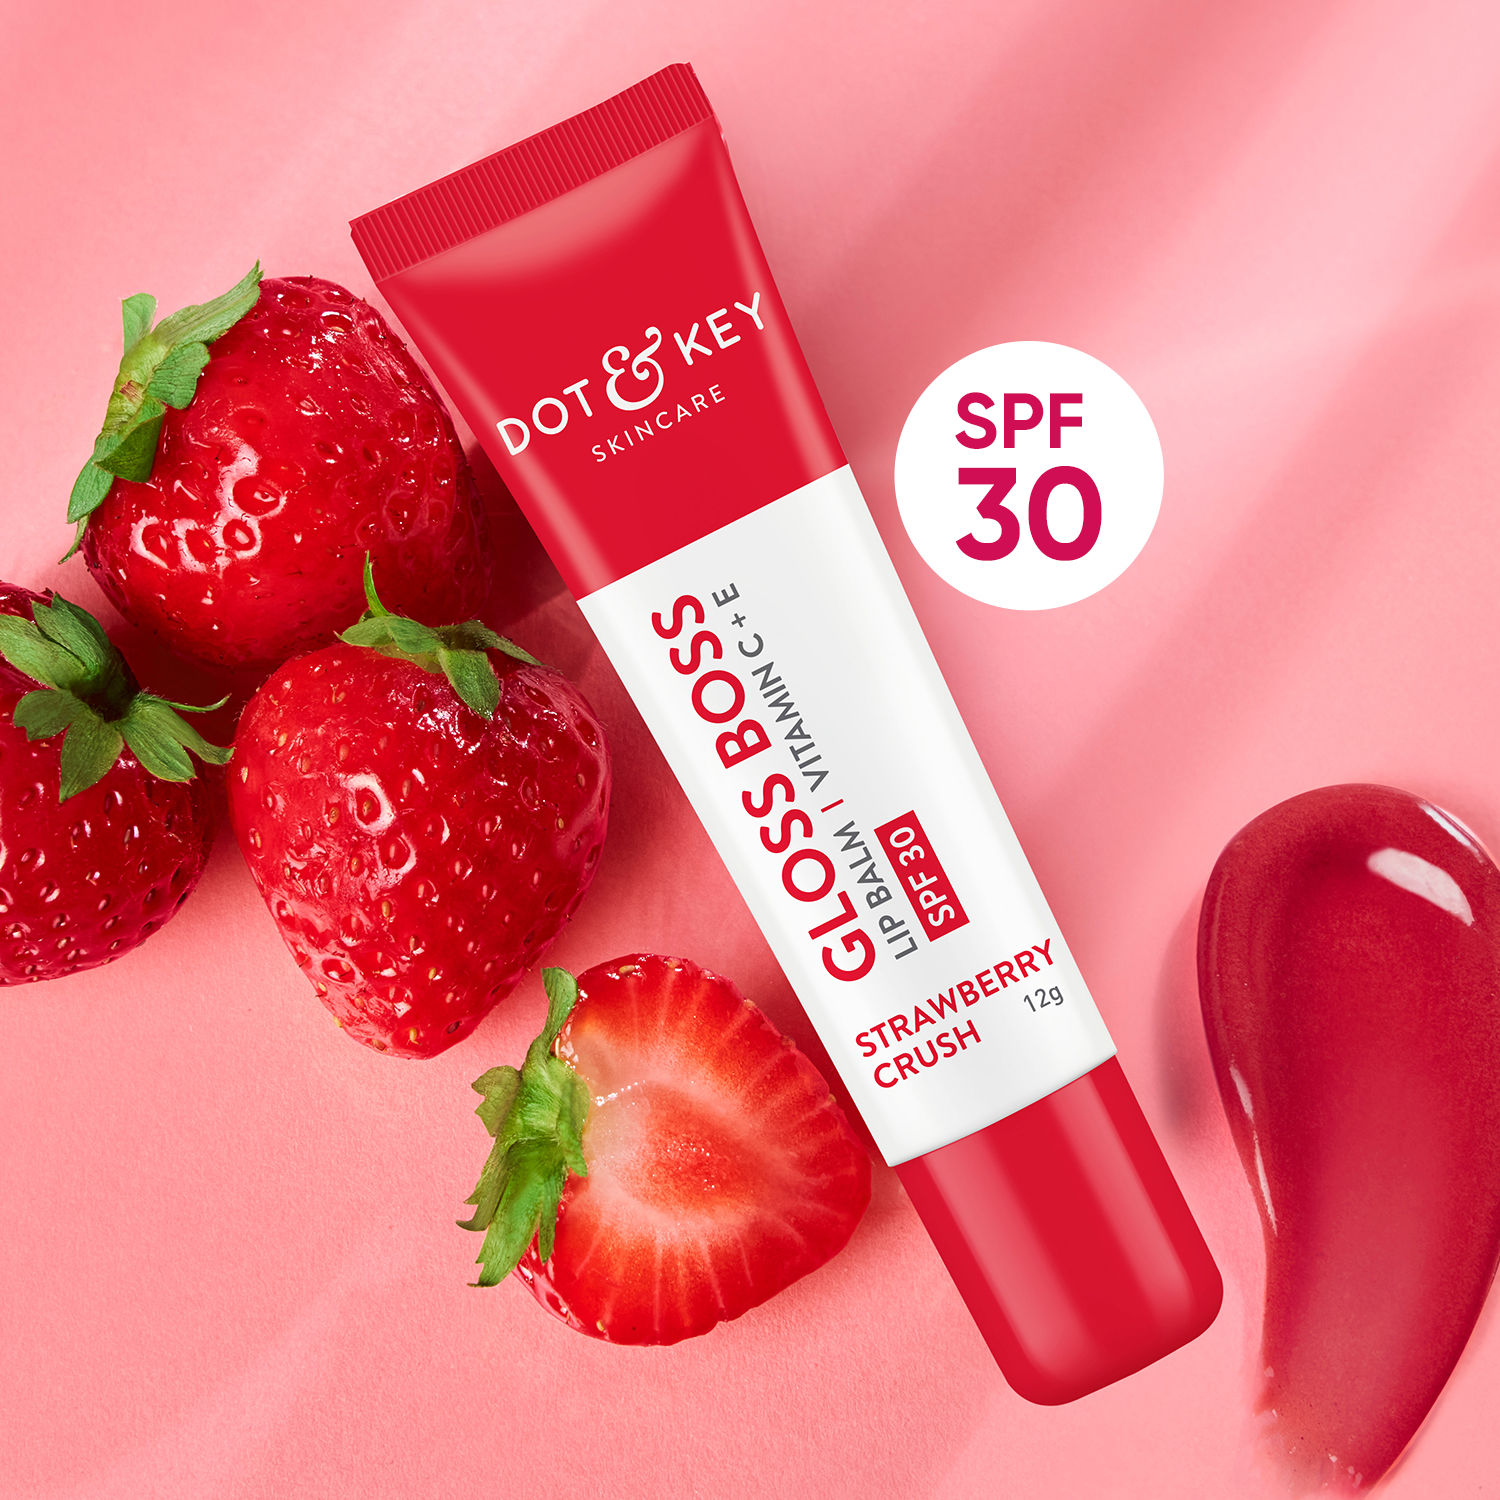 https://media6.ppl-media.com//tr:h-750,w-750,c-at_max,dpr-2/static/img/product/324018/dot-and-key-strawberry-lip-balm-for-soft-and-naturally-pink-lips-spf-30-and-vitamin-c-e-fades-lip-pigmentation-for-dark-lips-12g_1_display_1694690891_3b70394f.jpg